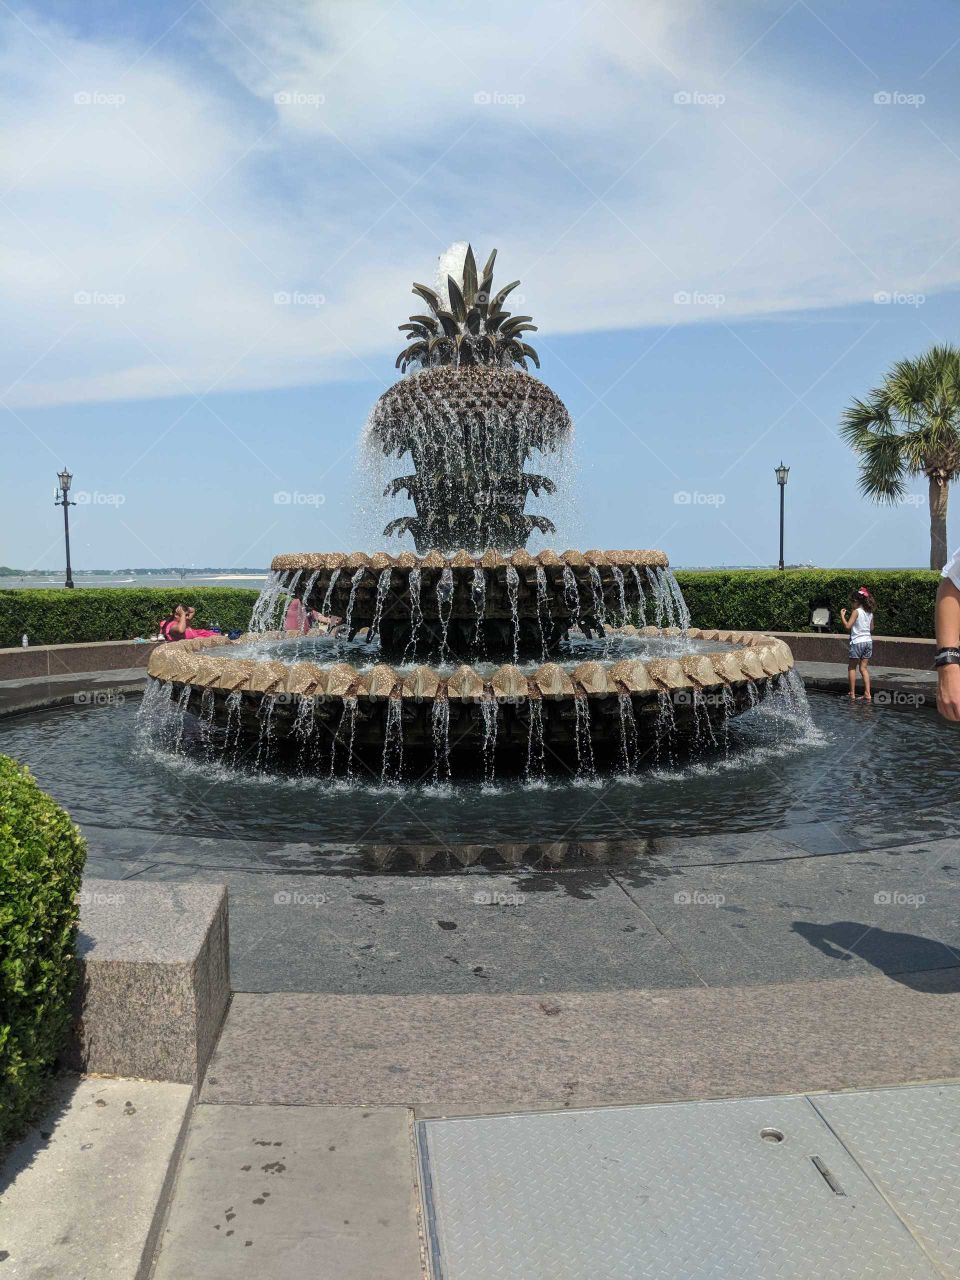 A picture of the pineapple fountain in Charleston, SC